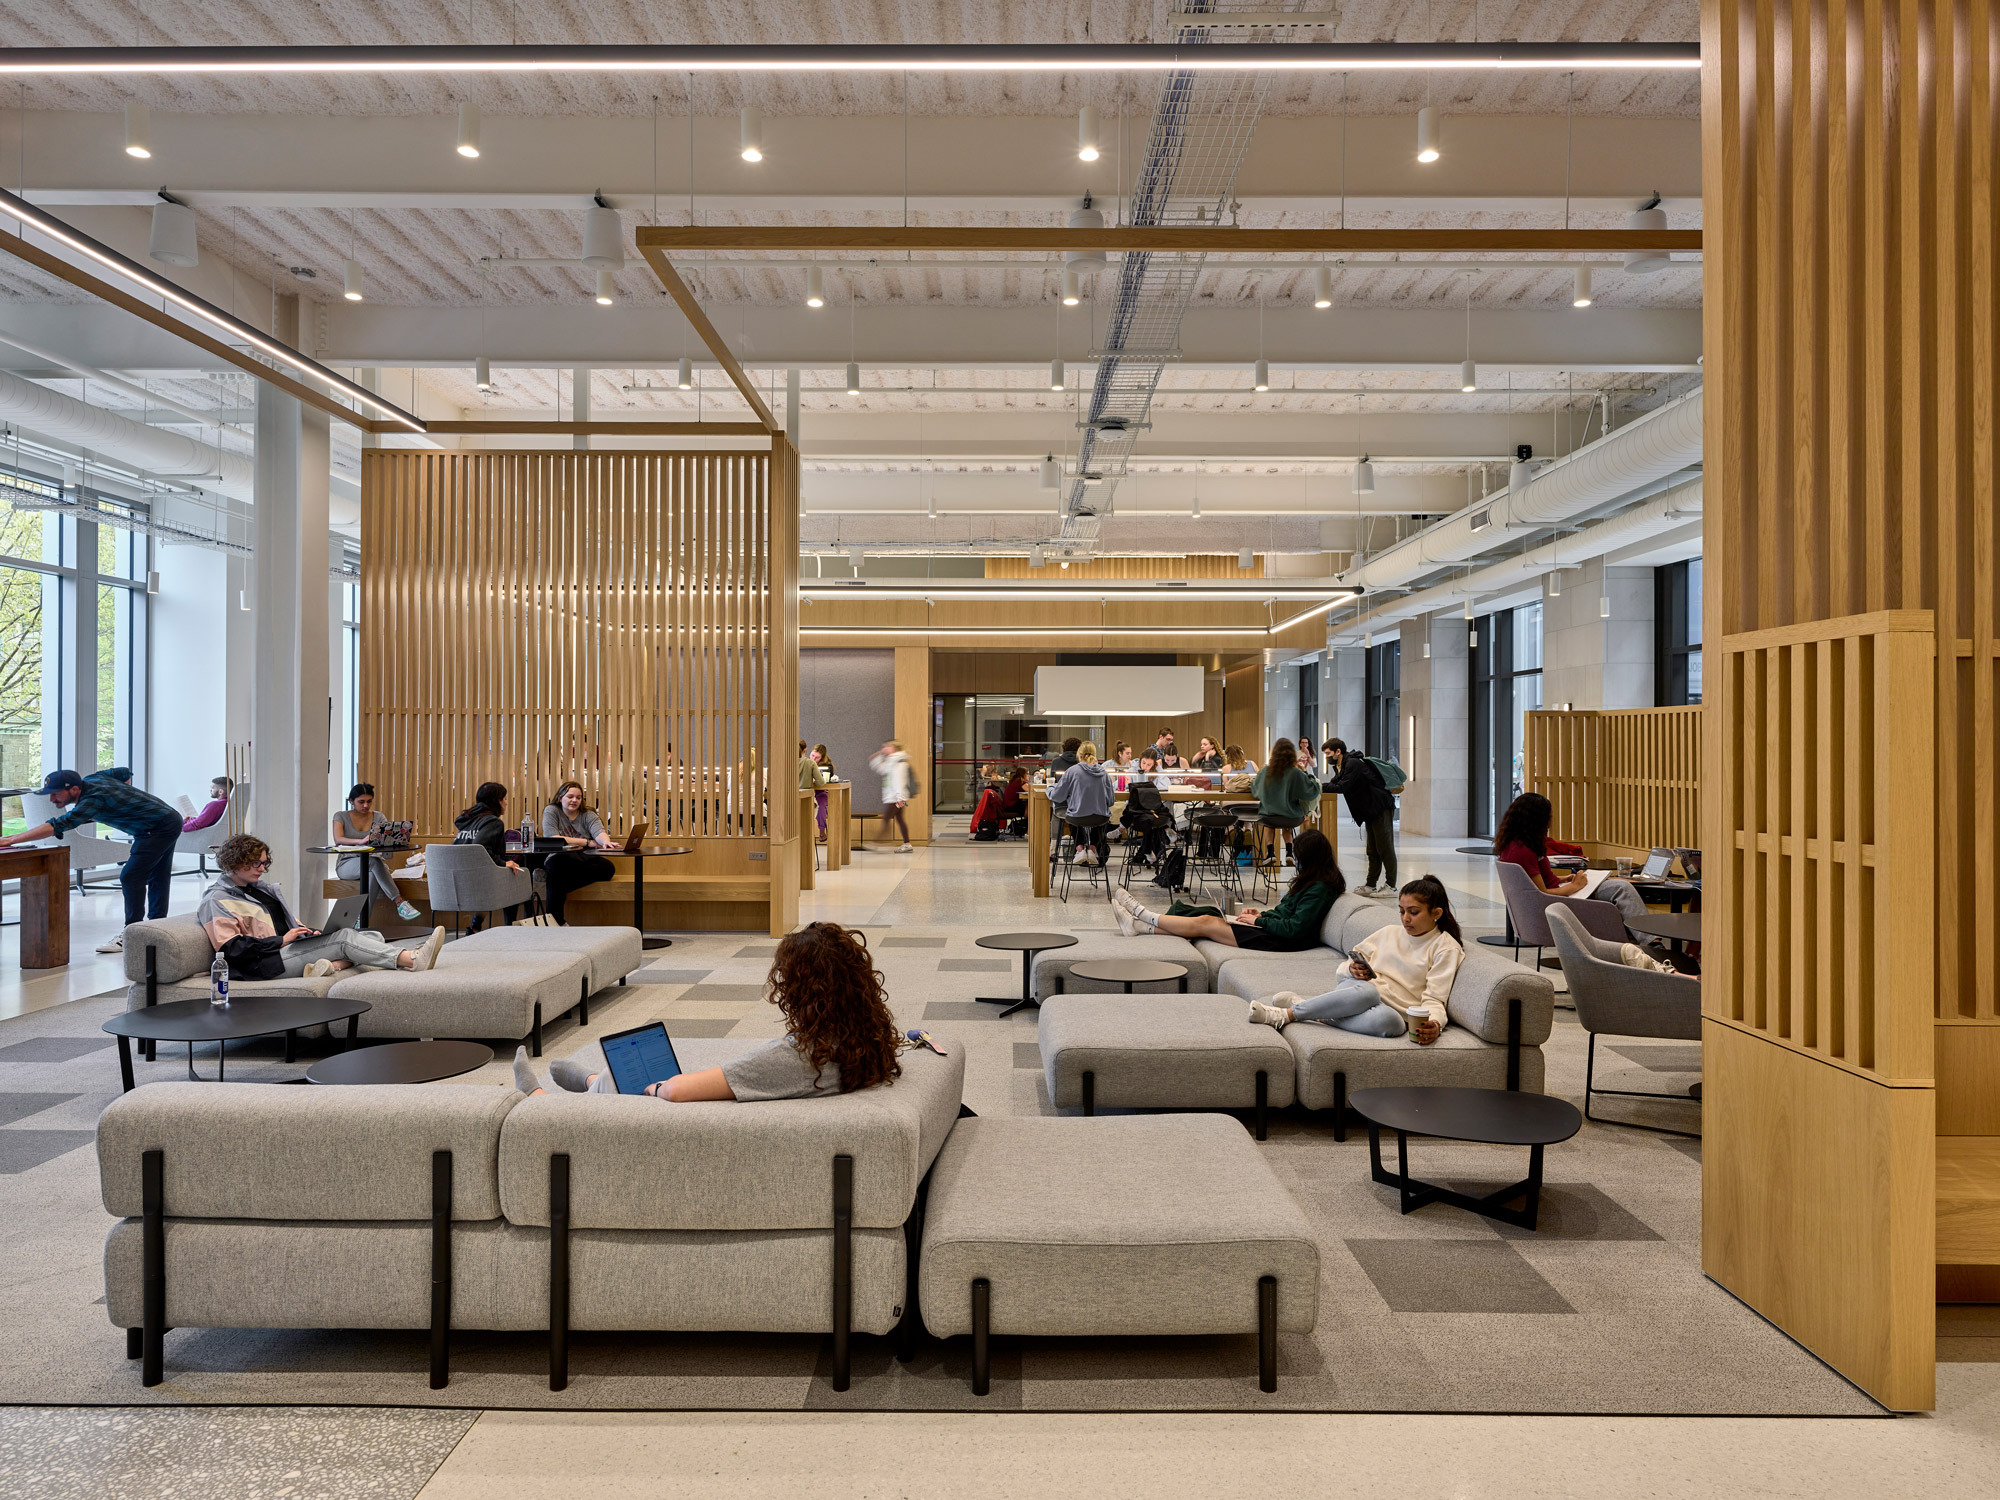 Open-plan office space featuring modular gray seating, slatted wood partitions, and a high exposed ceiling. Natural light filters through large windows, highlighting the warm tones of the wooden accents and the neutral color palette. People are working and interacting in a contemporary collaborative environment.